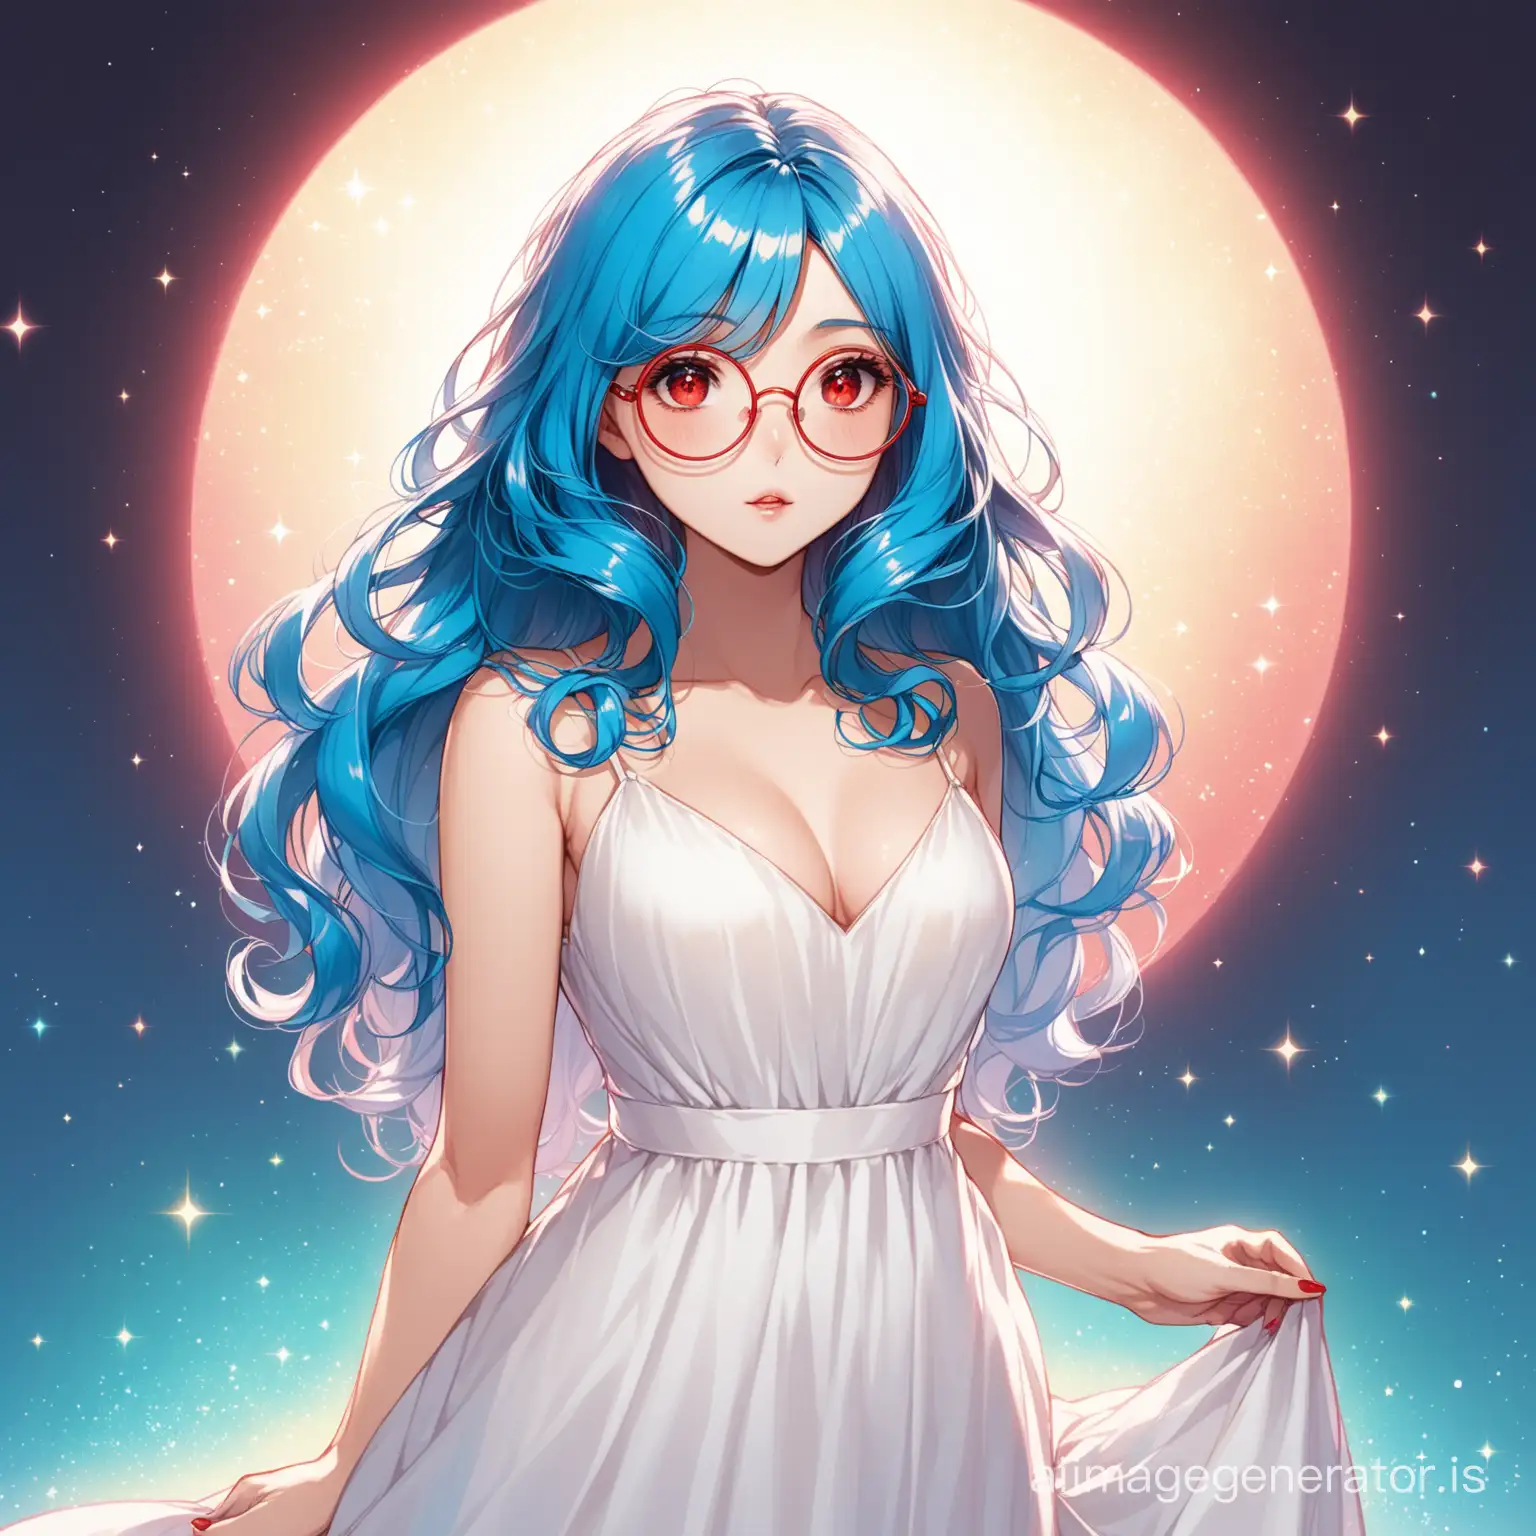 Young-Woman-with-Blue-Hair-and-Red-Highlights-in-Round-Glasses-and-White-Dress